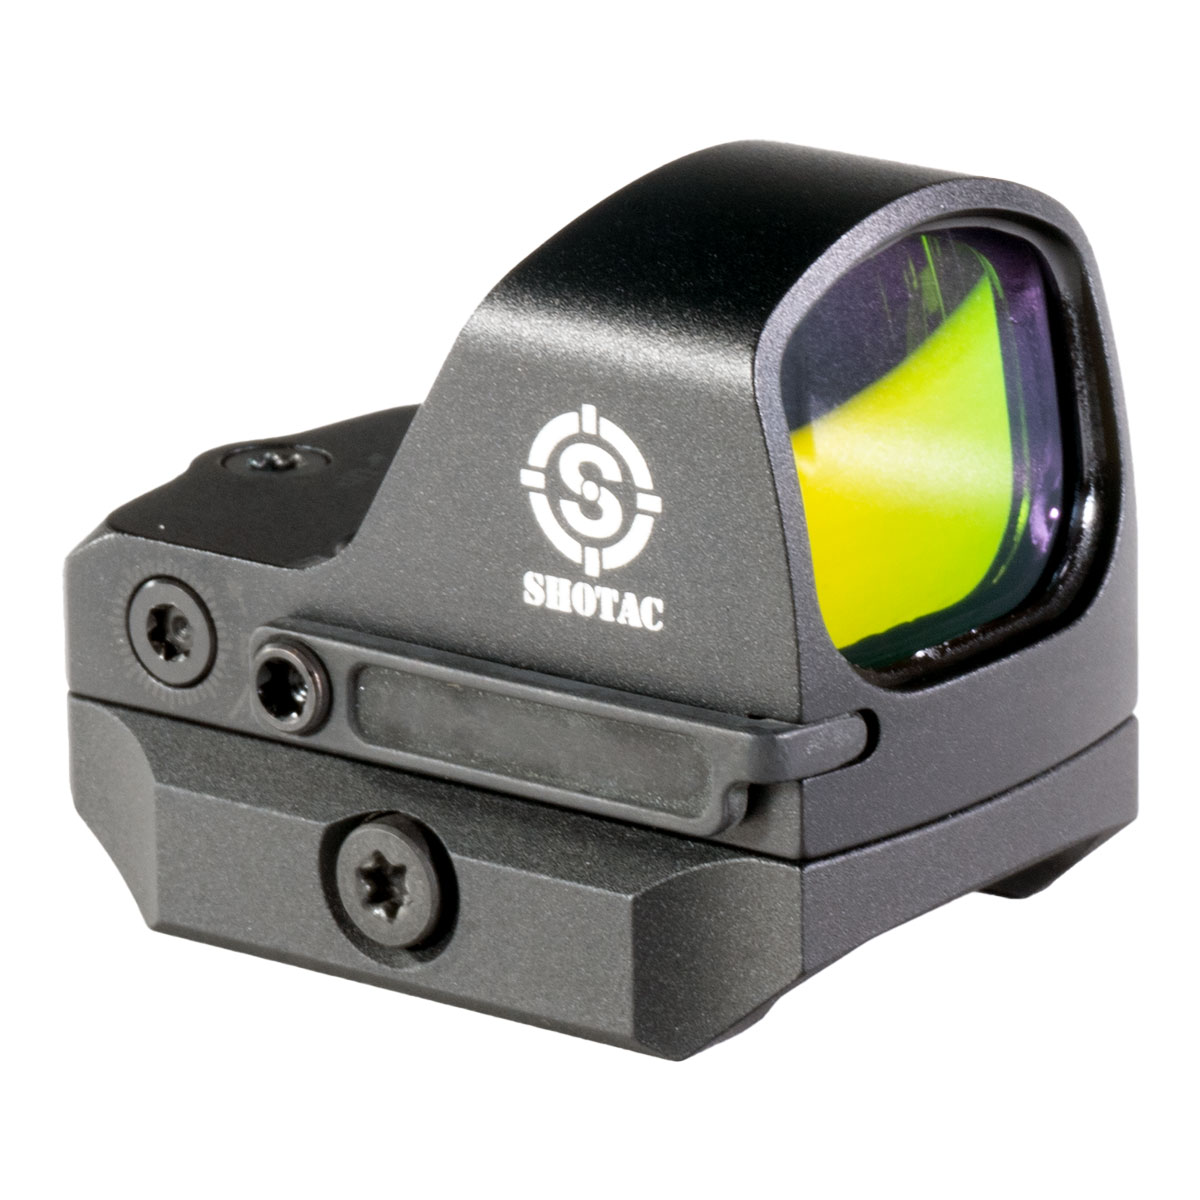 SHOTAC Compact Pistol Red Dot Sight with Shield RMS Footprint - Includes 1913 Picatinny Rail Mount, 1 CR2023 Battery